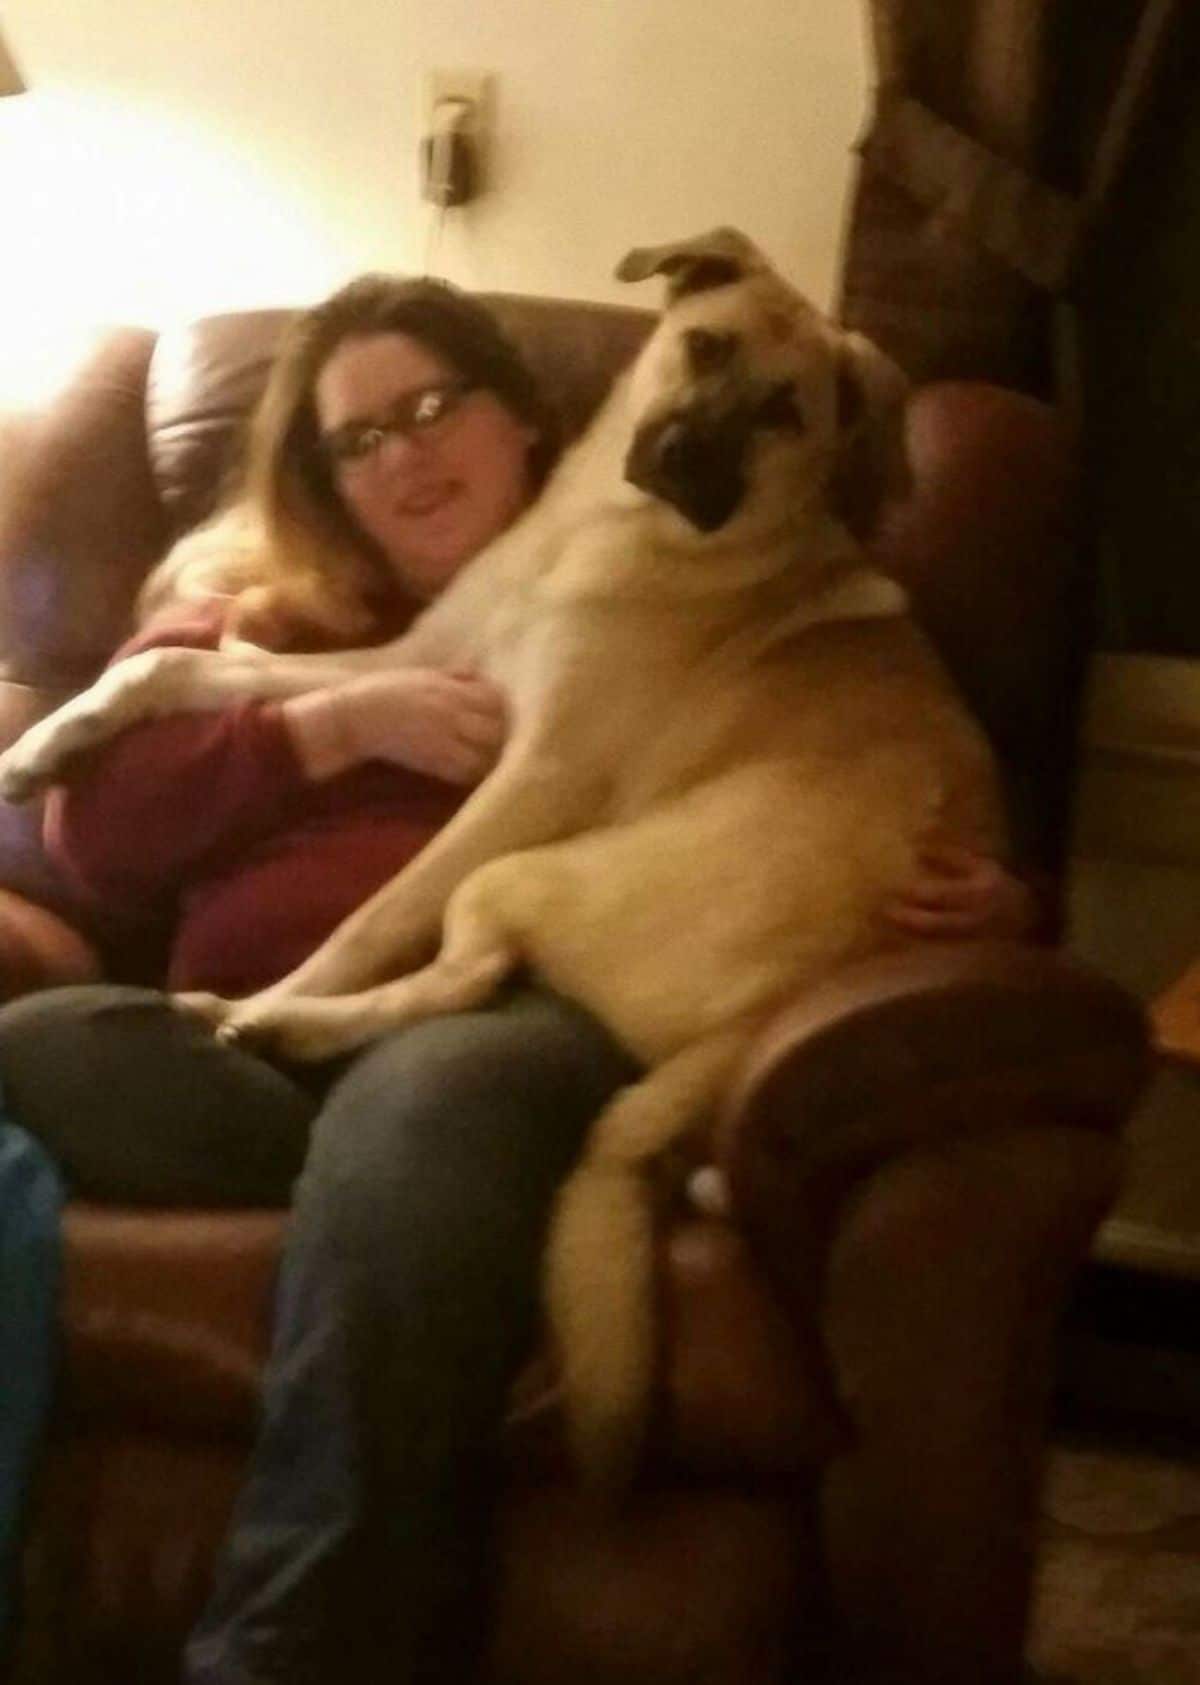 large brown dog sitting on a woman's lap